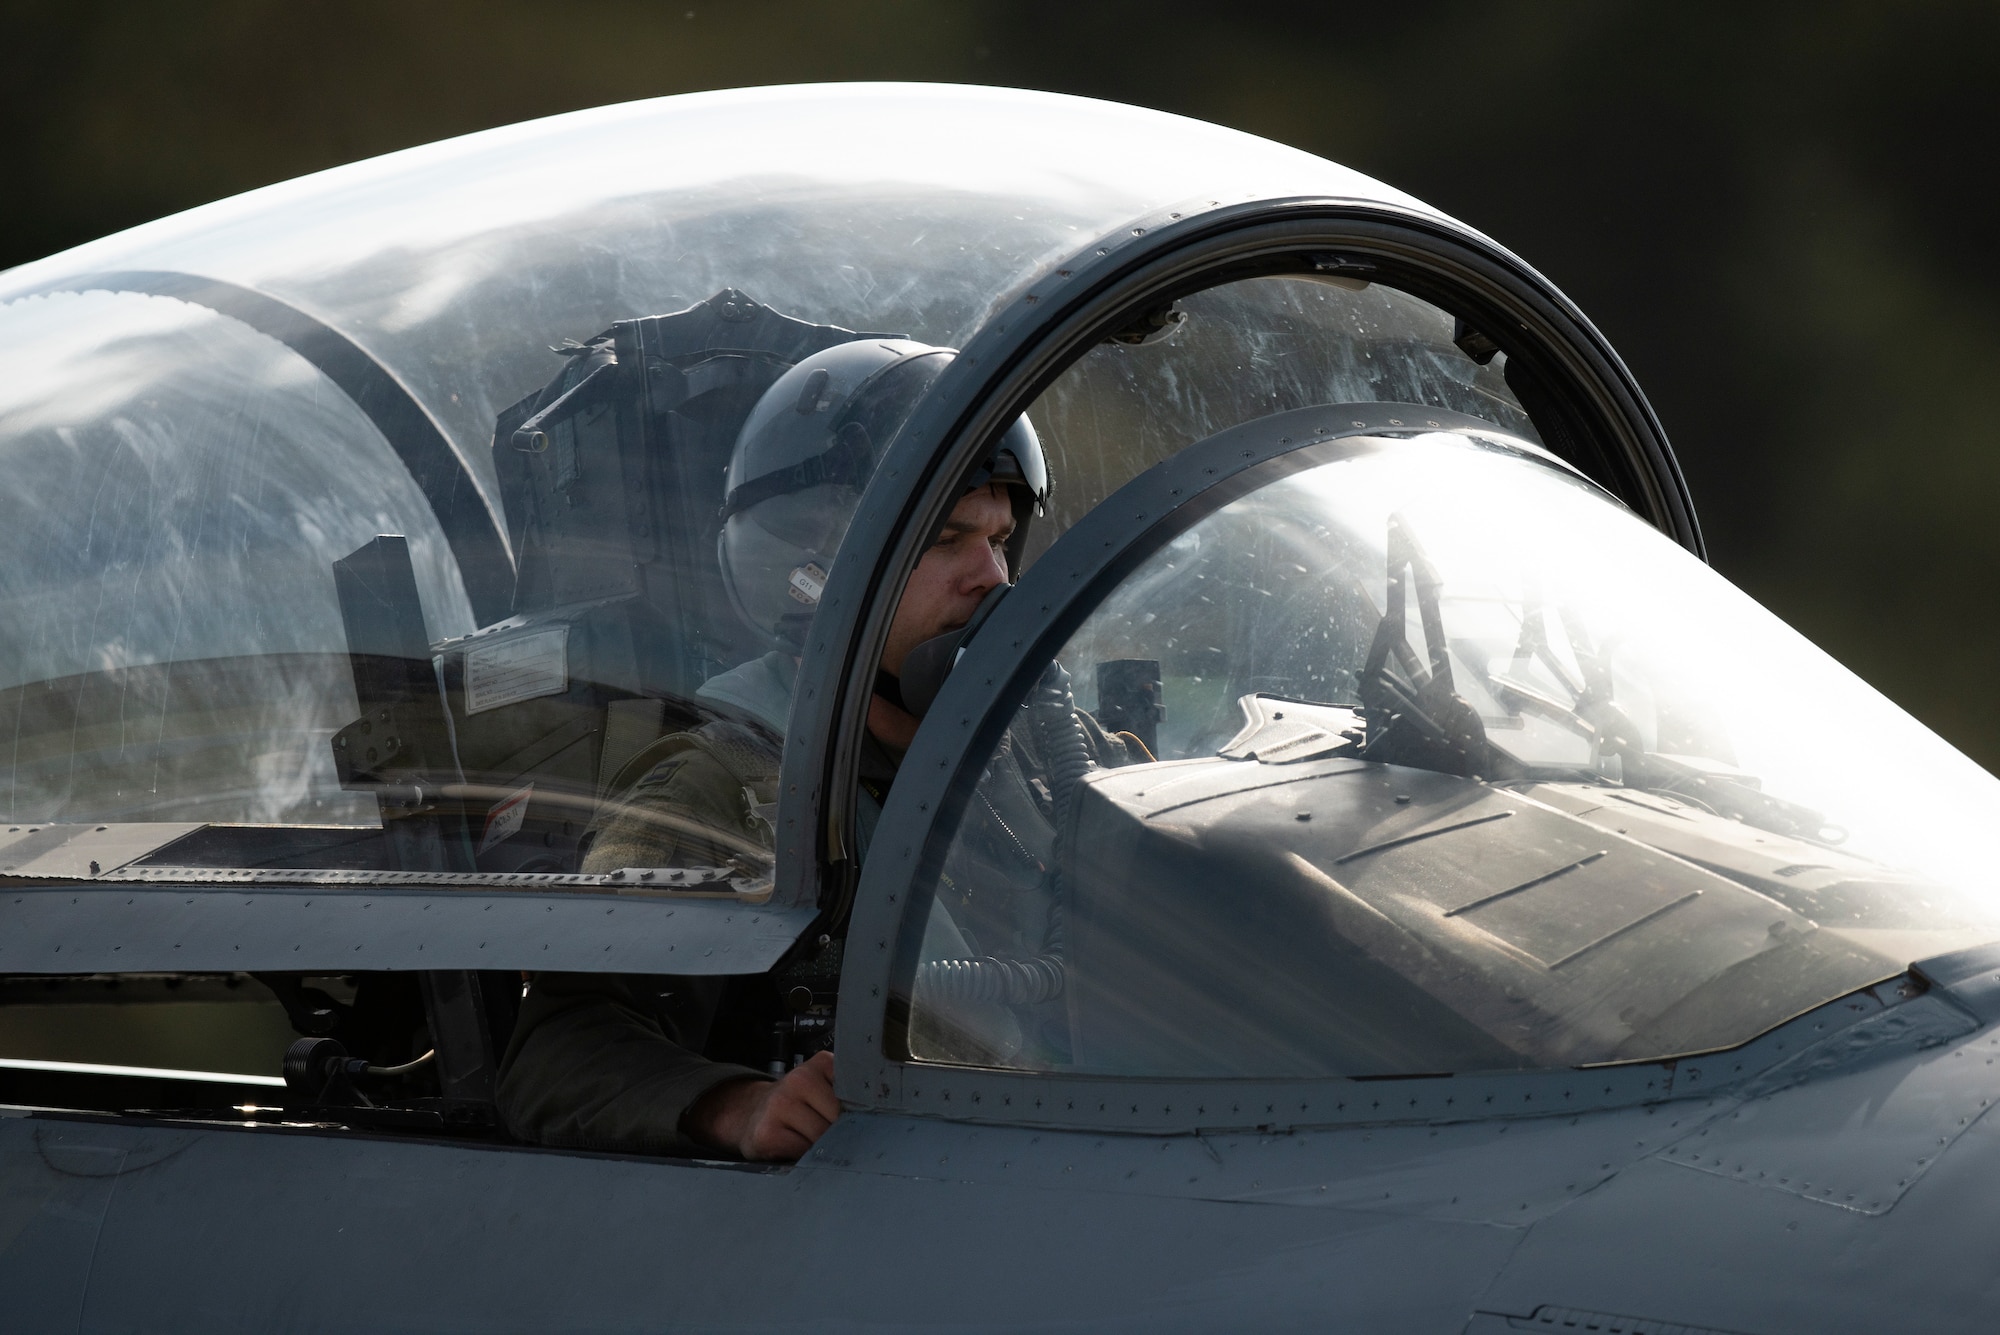 A pilot assigned to the 493rd Fighter Squadron waits while his F-15C Eagle is refueled at the "hot pits" at Royal Air Force Lakenheath, England, May 20, 2020. “Hot pit” refueling provides necessary training and experience required to reduce the ground time between sorties by refueling active aircraft, enabling maximum training in a shorter time frame. (U.S. Air Force photo by Airman 1st Class Jessi Monte)